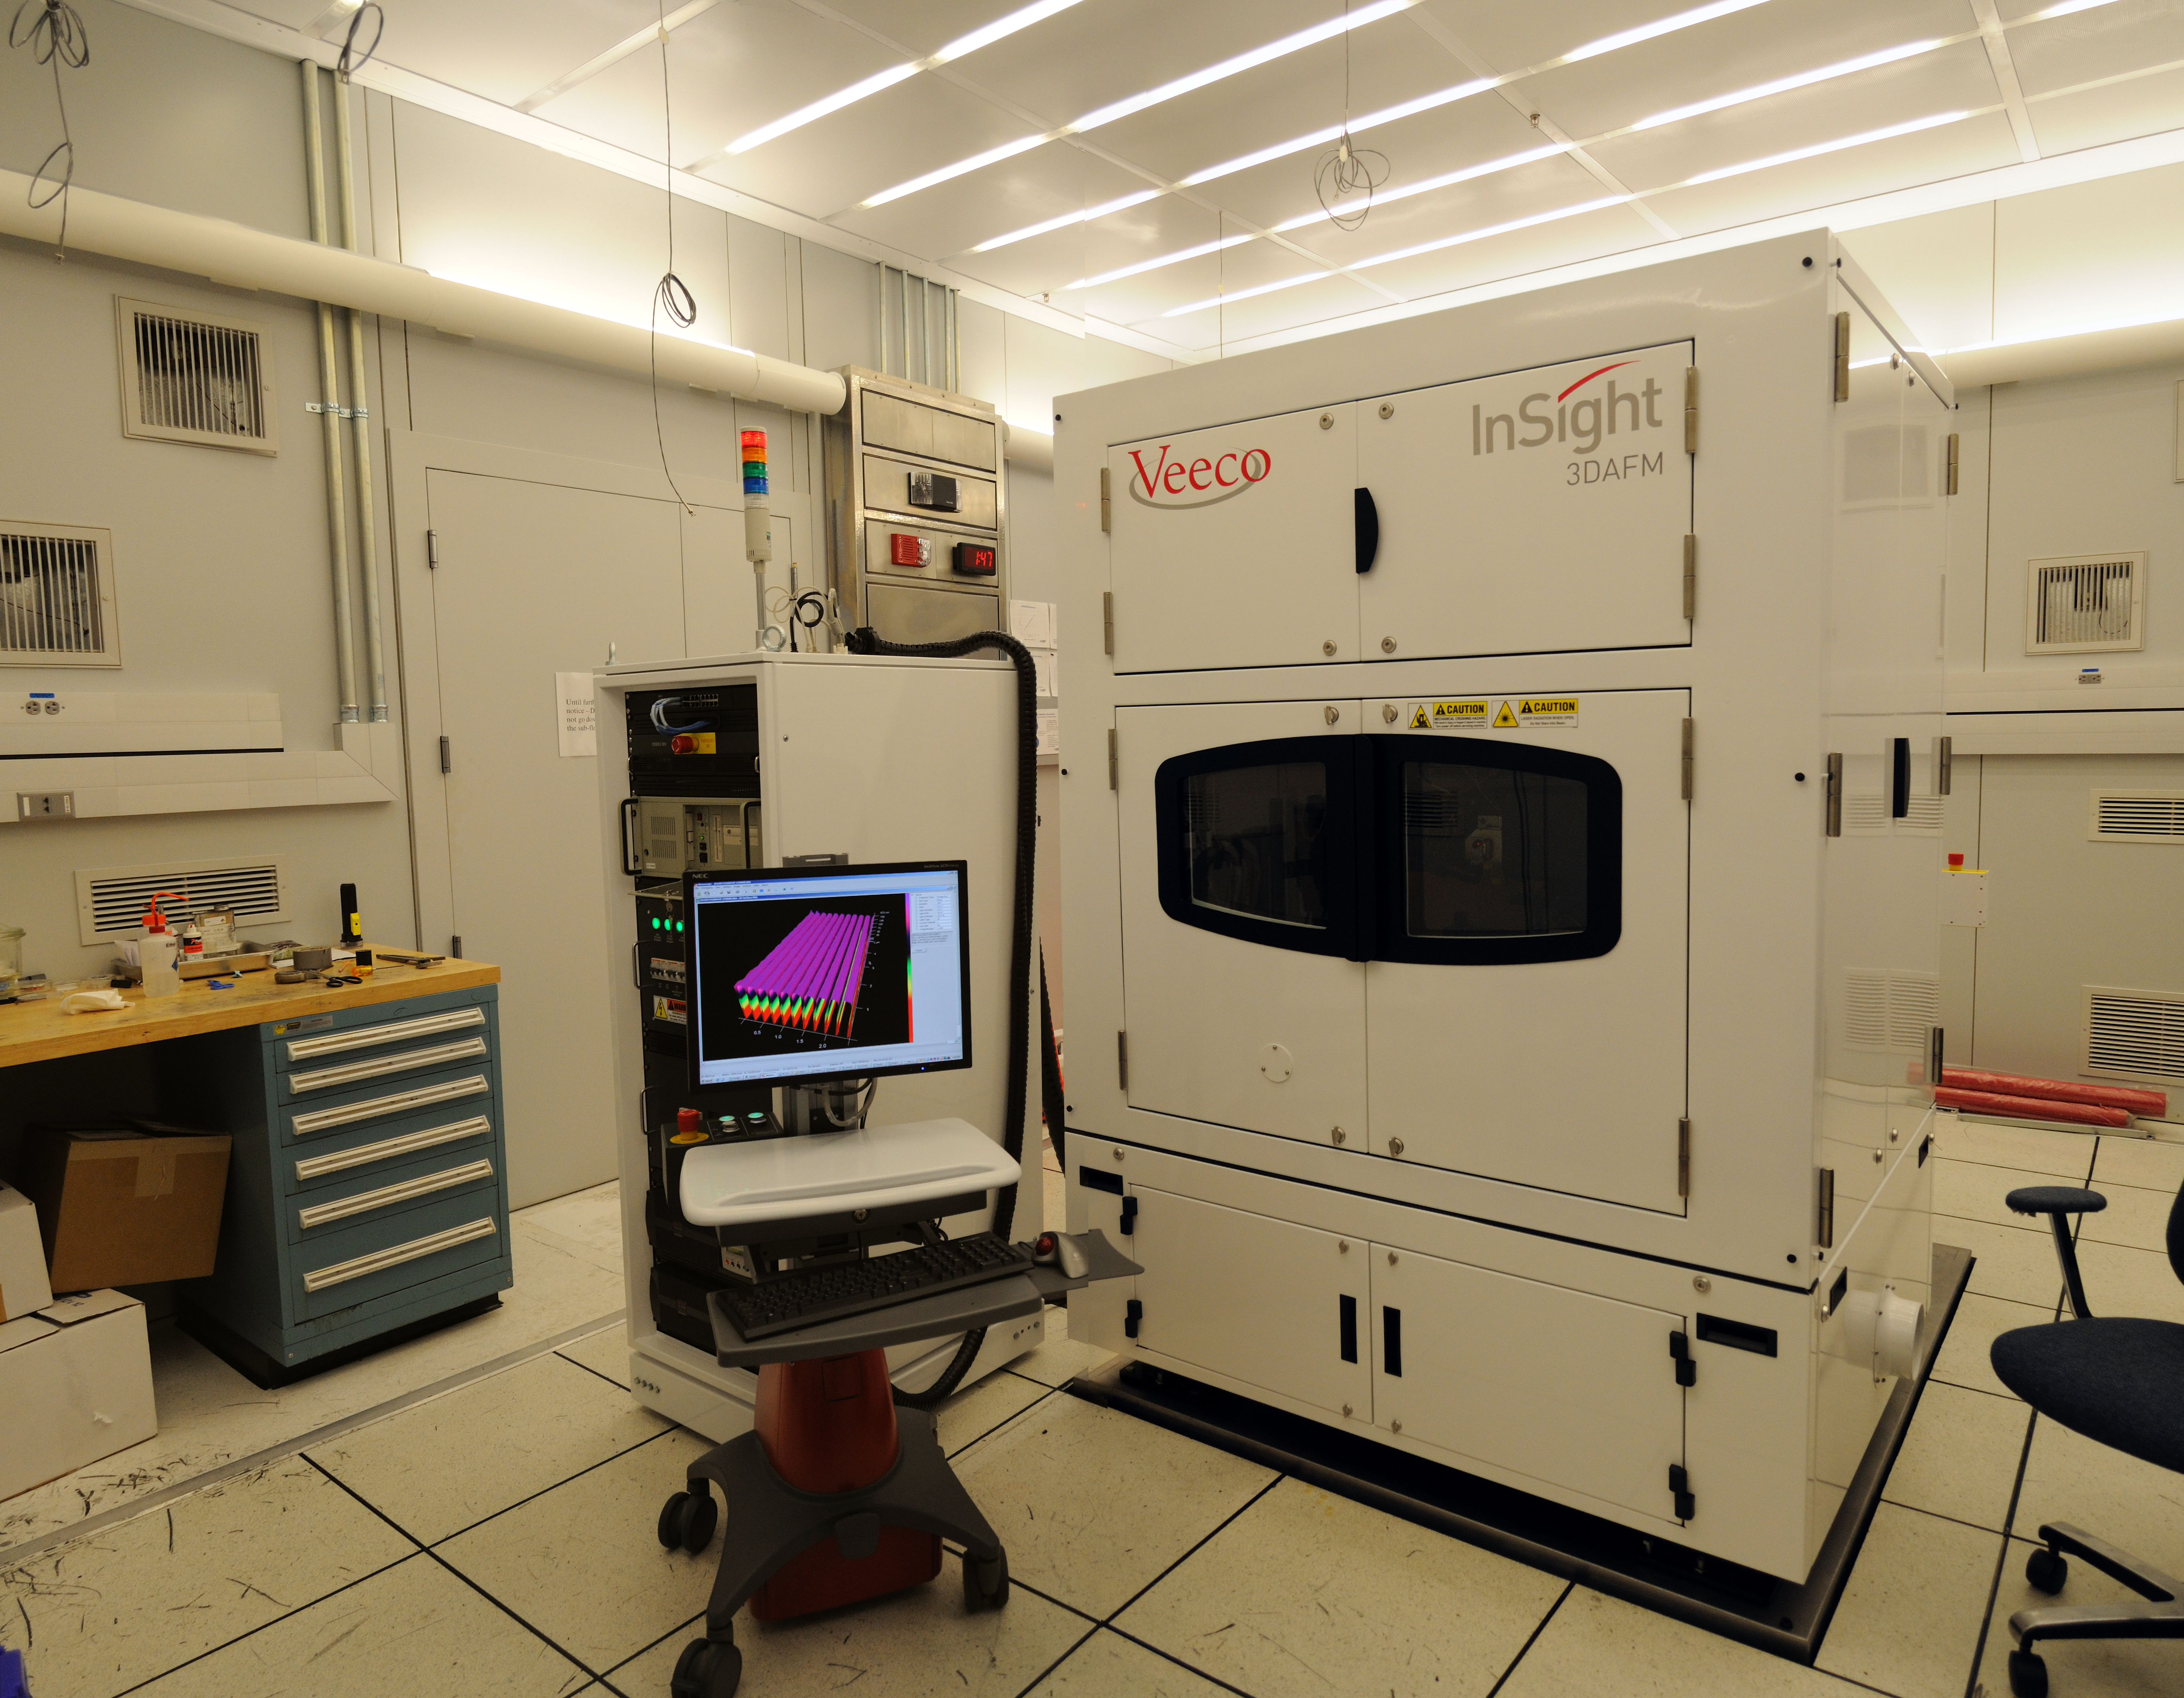 Veeco Insight 3D Atomic Force Microscope is used for linewidth metrology in the semiconductor industry and is used at NIST to support the single crystal critical dimension reference material (SCCDRM) project.